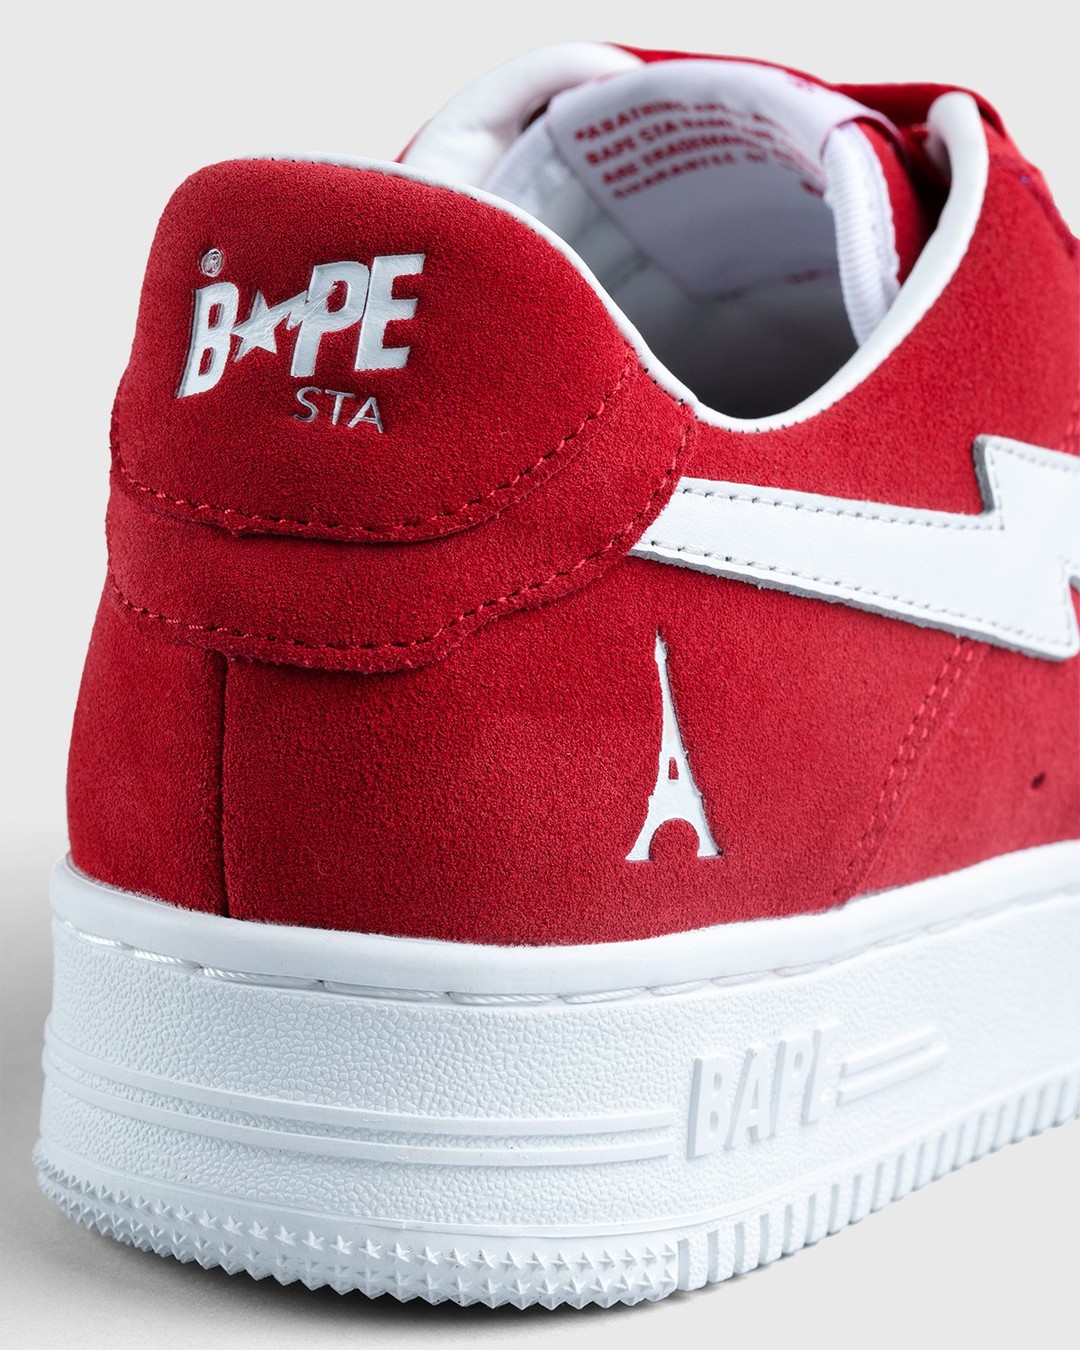 BAPE x Highsnobiety – BAPE STA Red - Low Top Sneakers - Red - Image 7